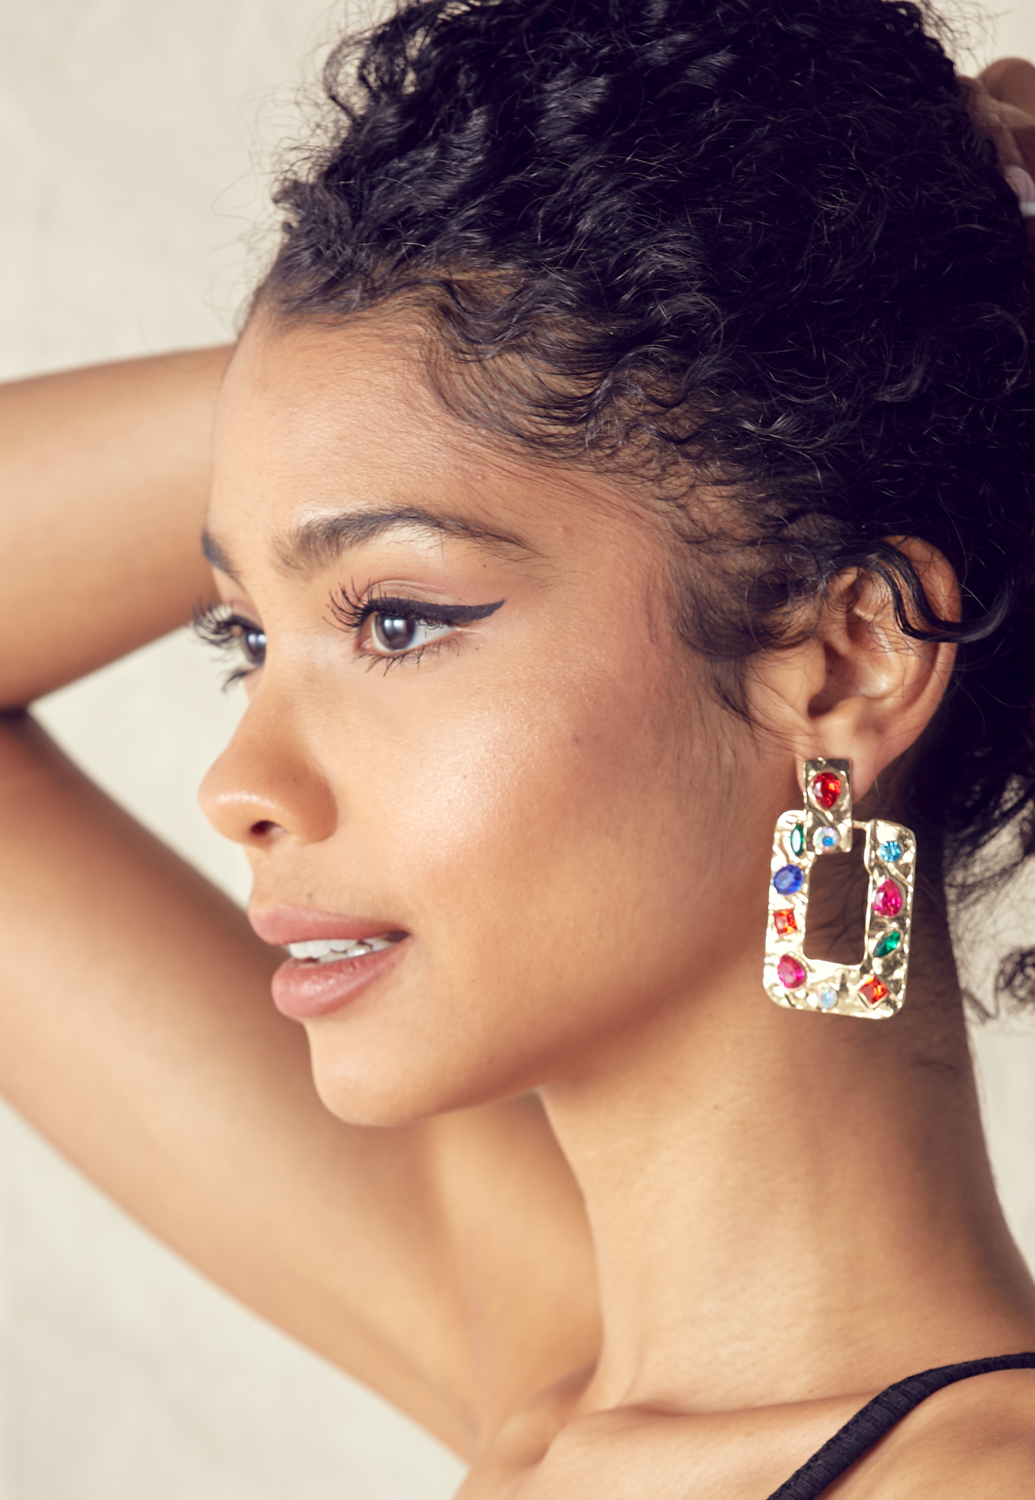 Multi Colored Gold Square Earrings